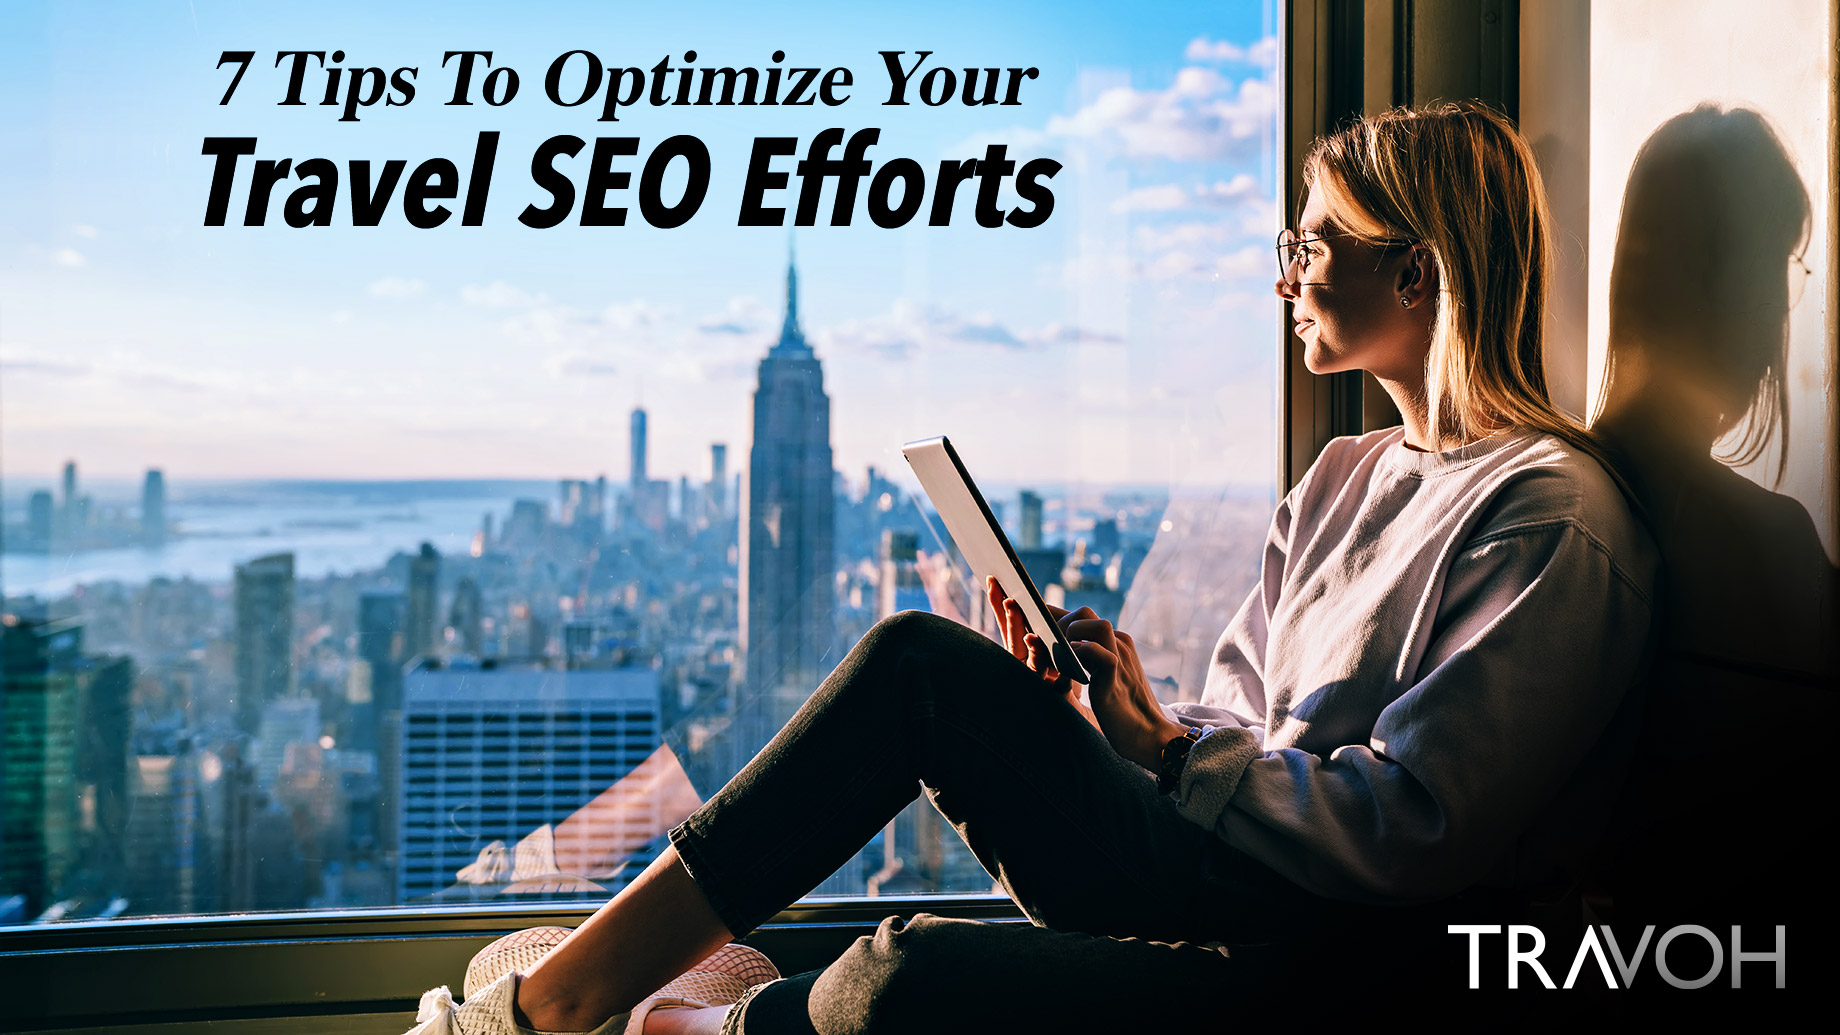 7 Tips To Optimize Your Travel SEO Efforts